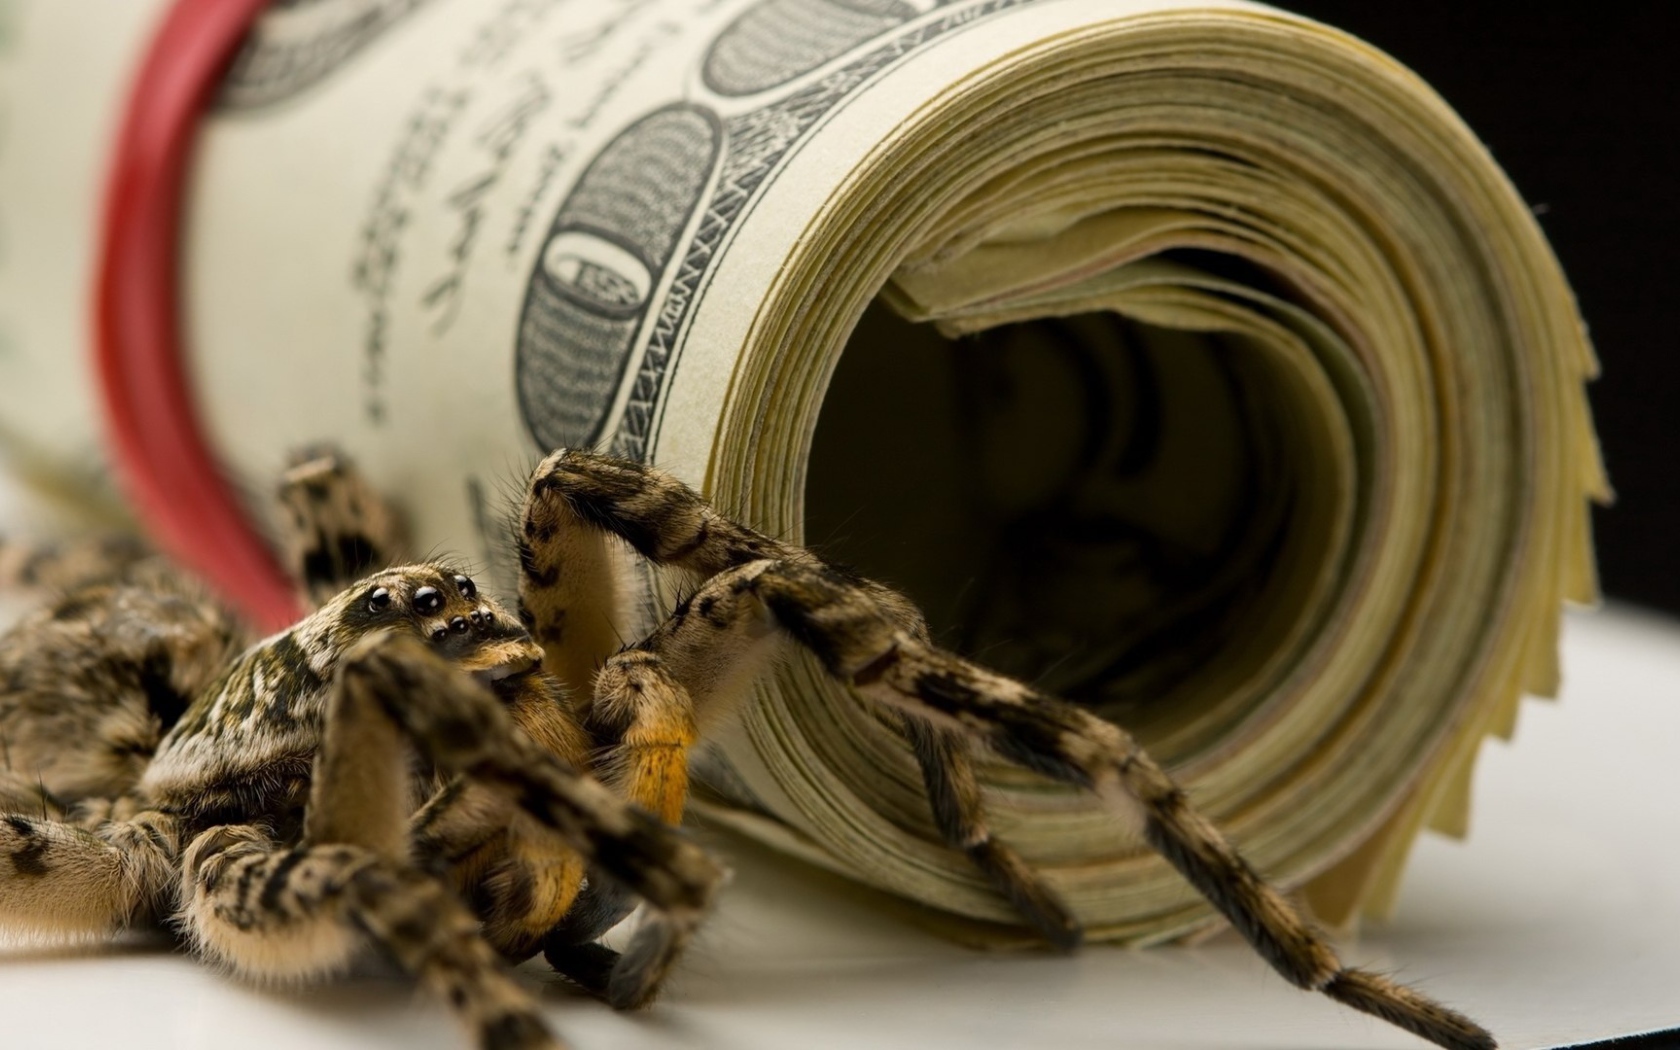 Spider and the pack of dollars